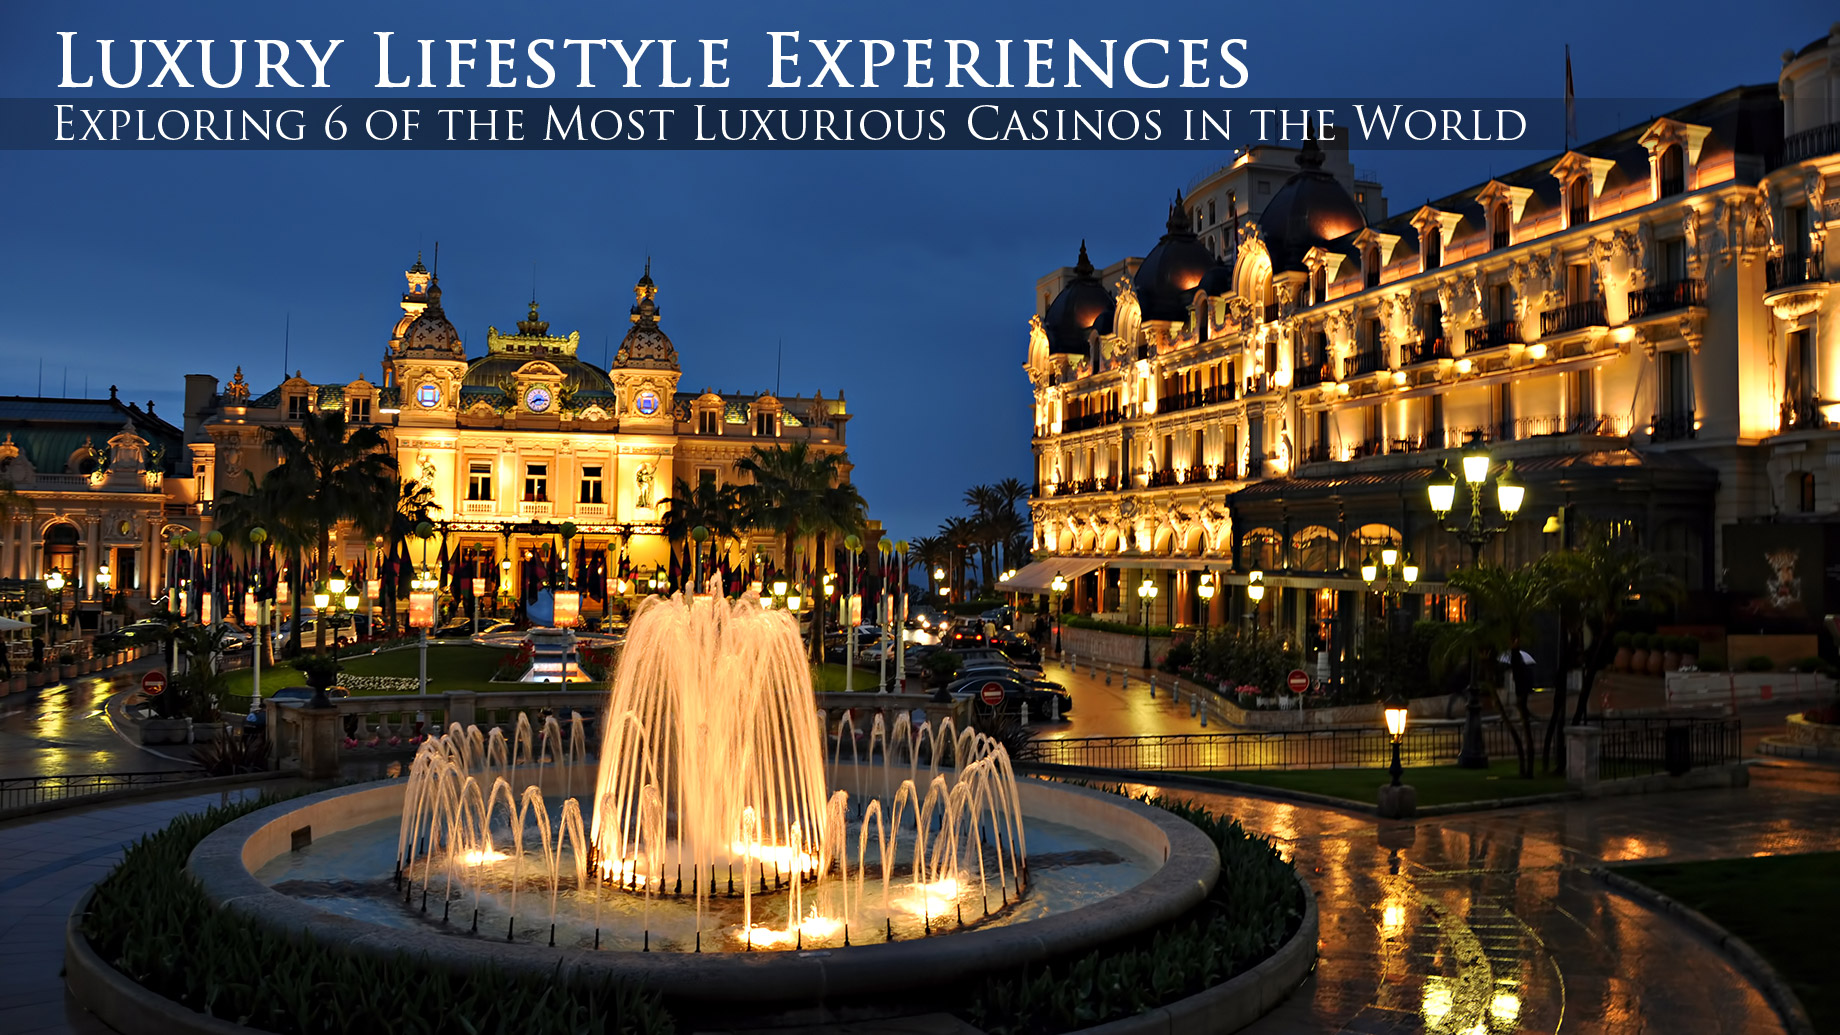 Luxury Lifestyle Experiences – Exploring 6 of the Most Luxurious Casinos in the World